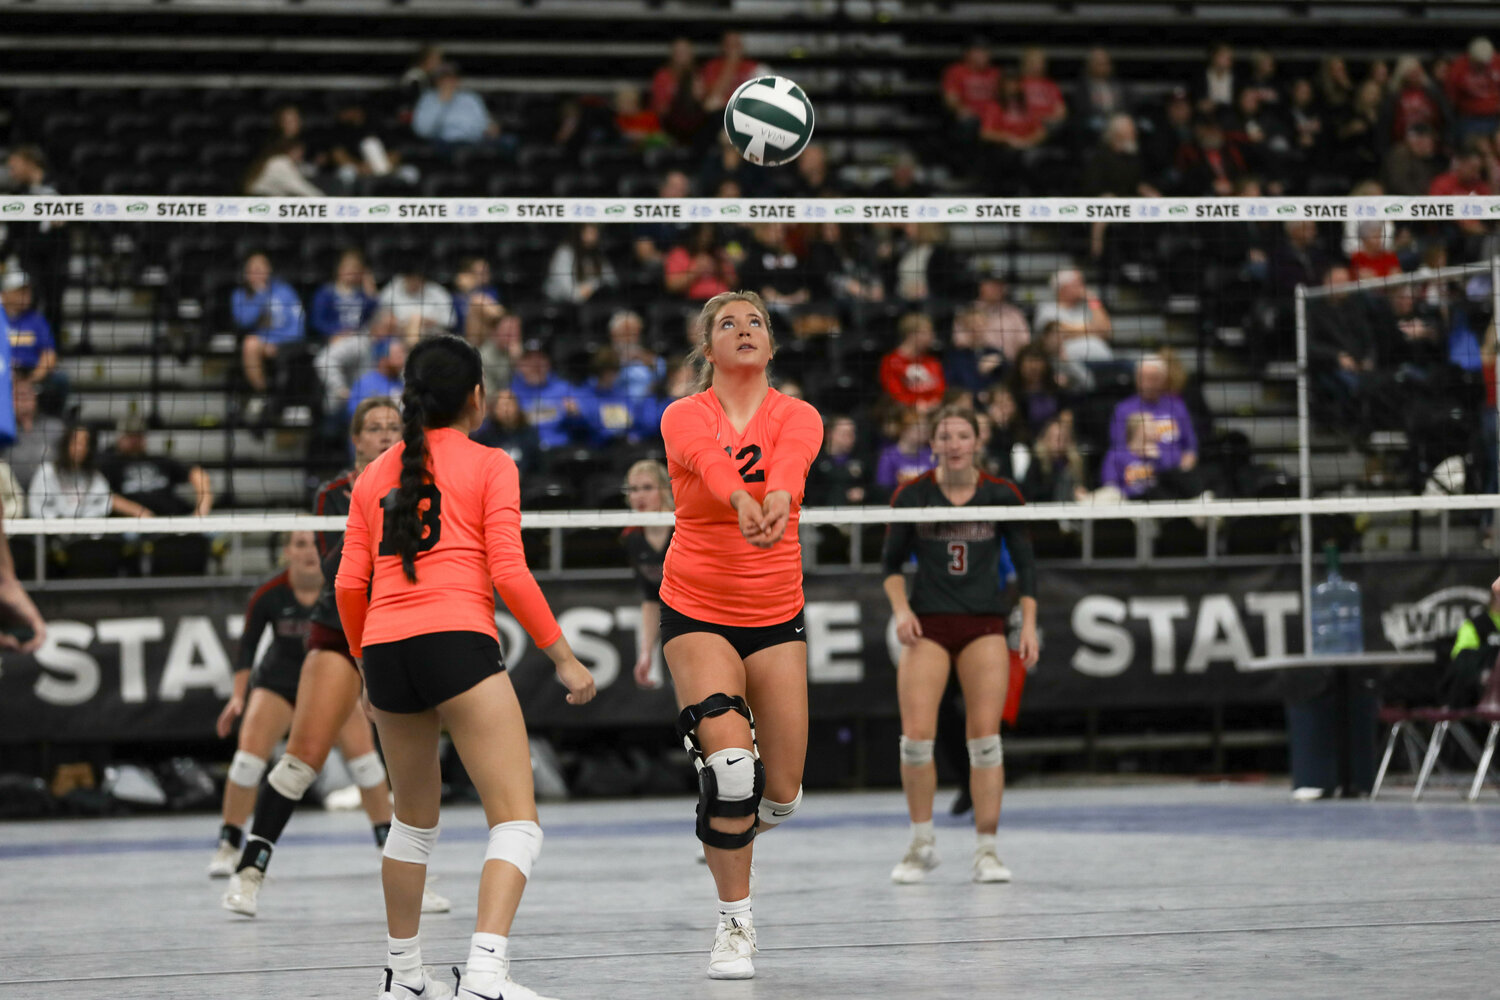 Dakota Hamilton bumps the ball behind her during Napavine's first-round matchup at the state tournament on Nov. 8 in Yakima.